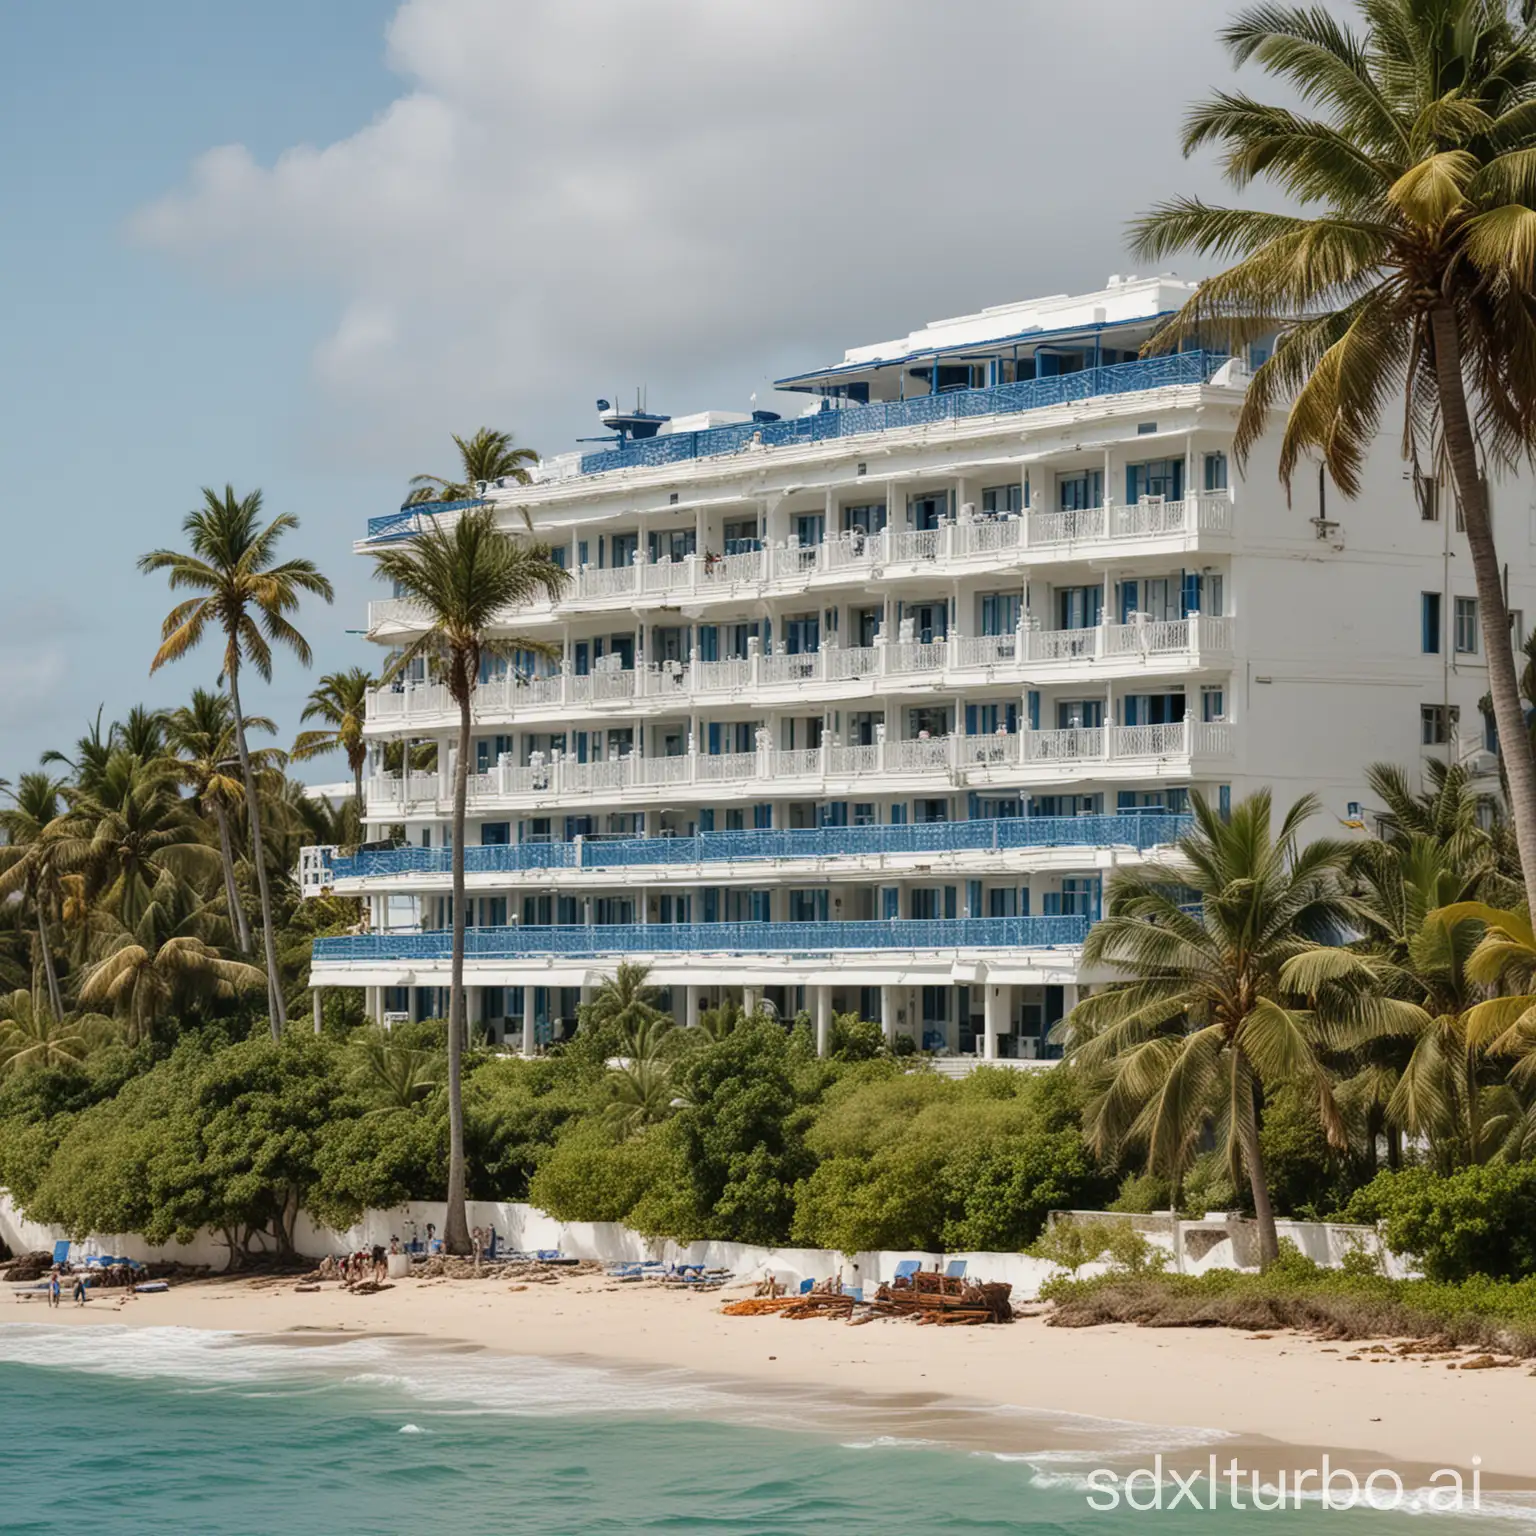 Oceanfront-Hotel-with-Palm-Trees-and-Balconies